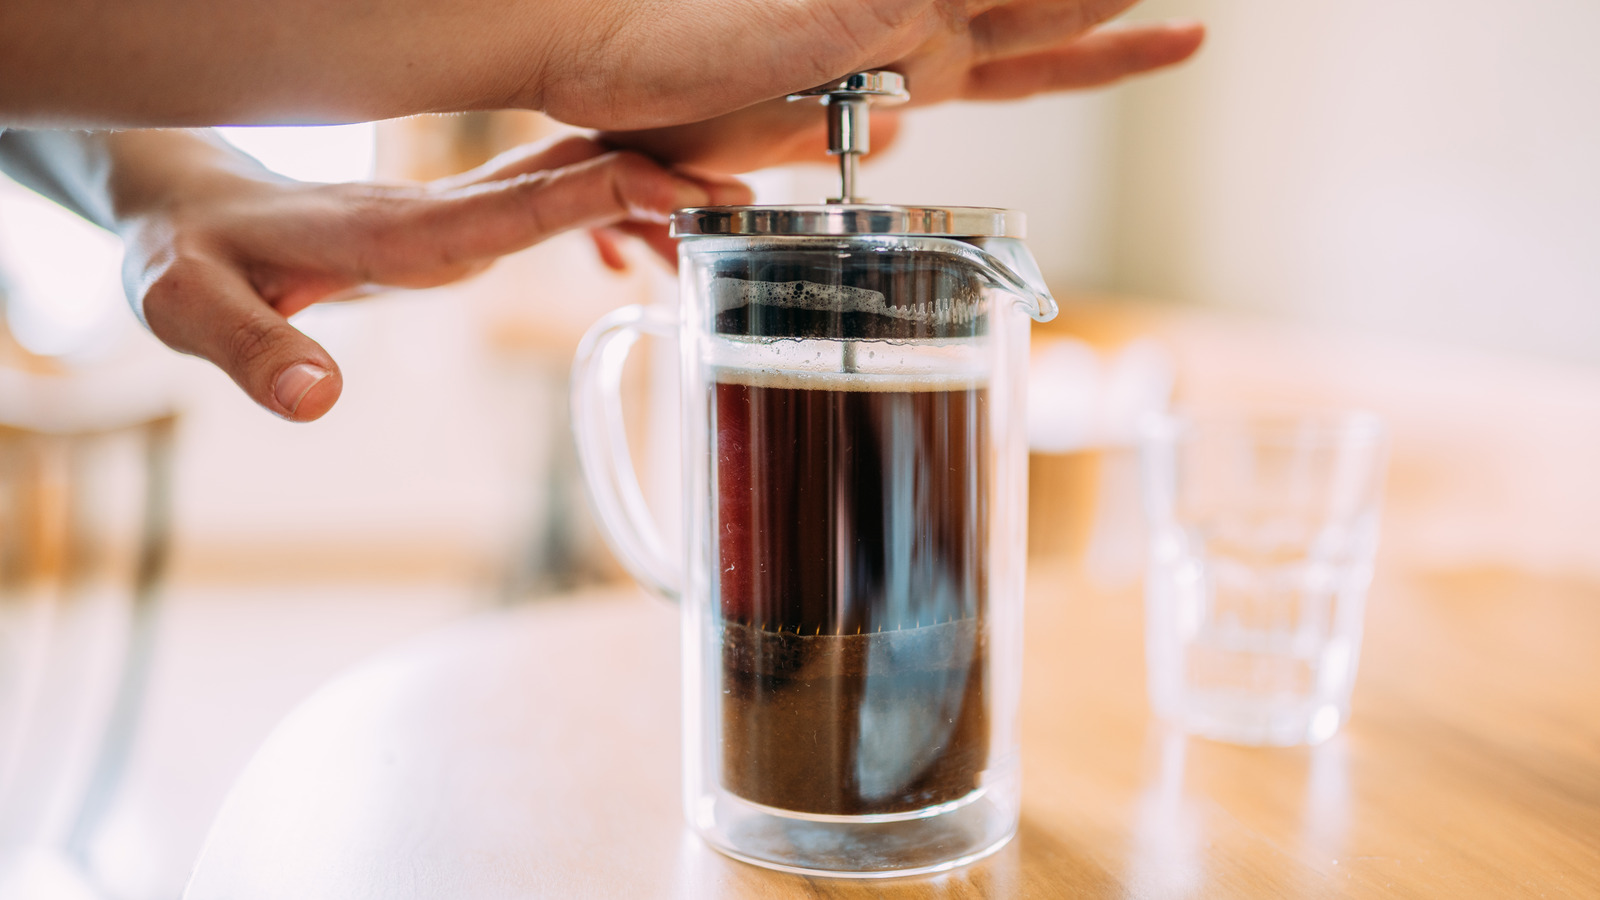 https://www.thedailymeal.com/img/gallery/11-tips-for-making-the-best-coffee-with-your-french-press/l-intro-1690496781.jpg